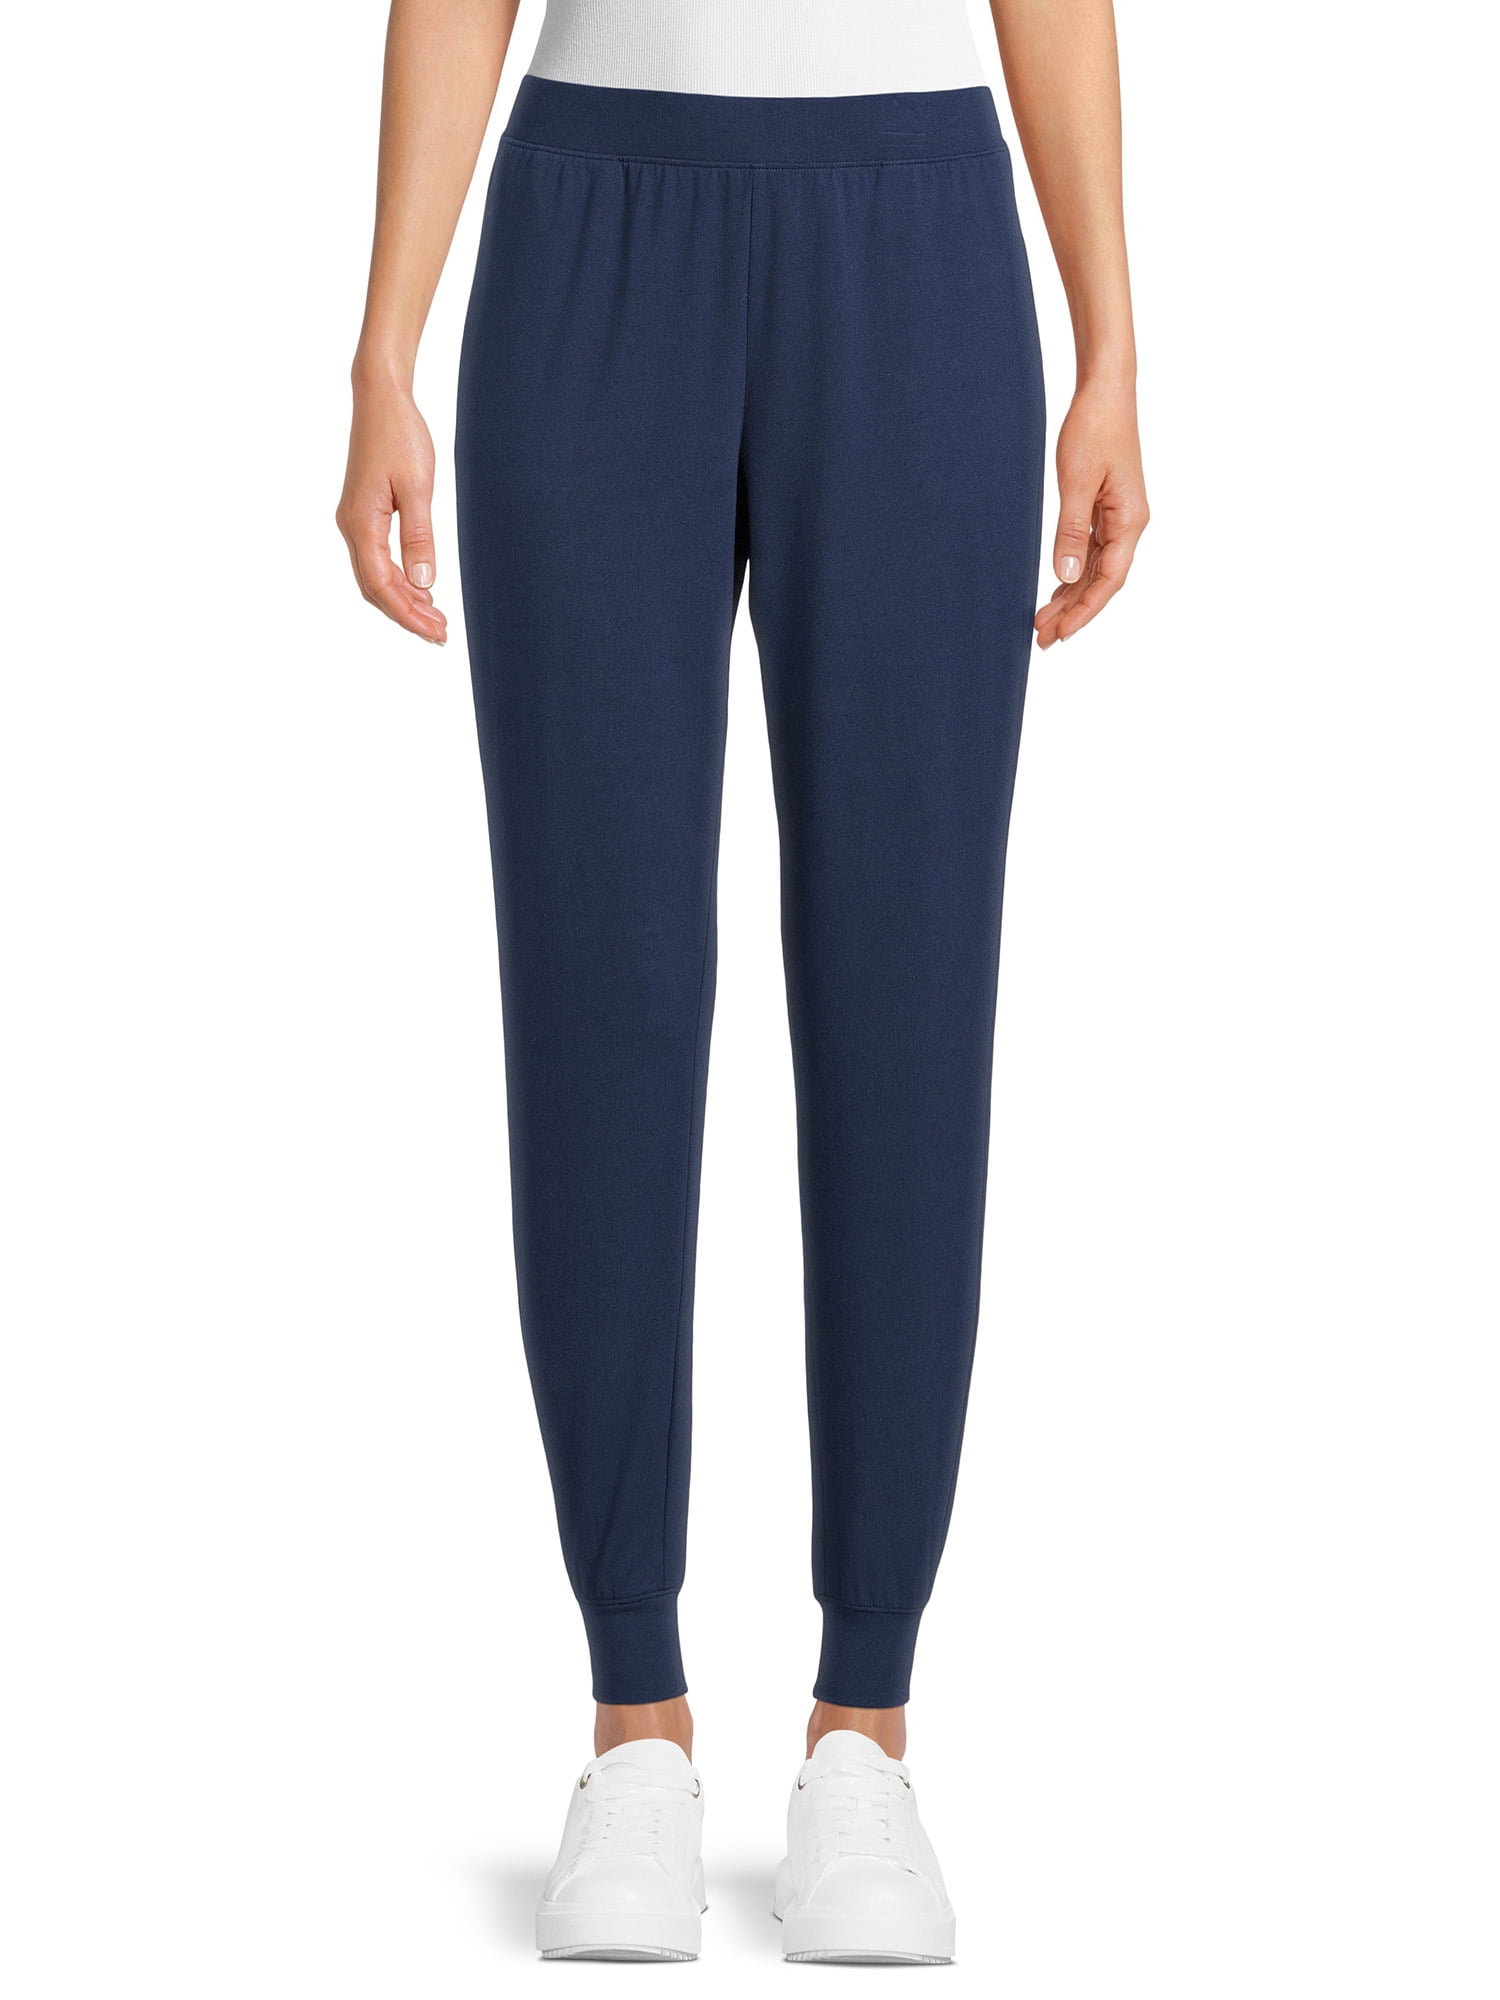 Athletic Works Women's Athleisure Pull On Joggers